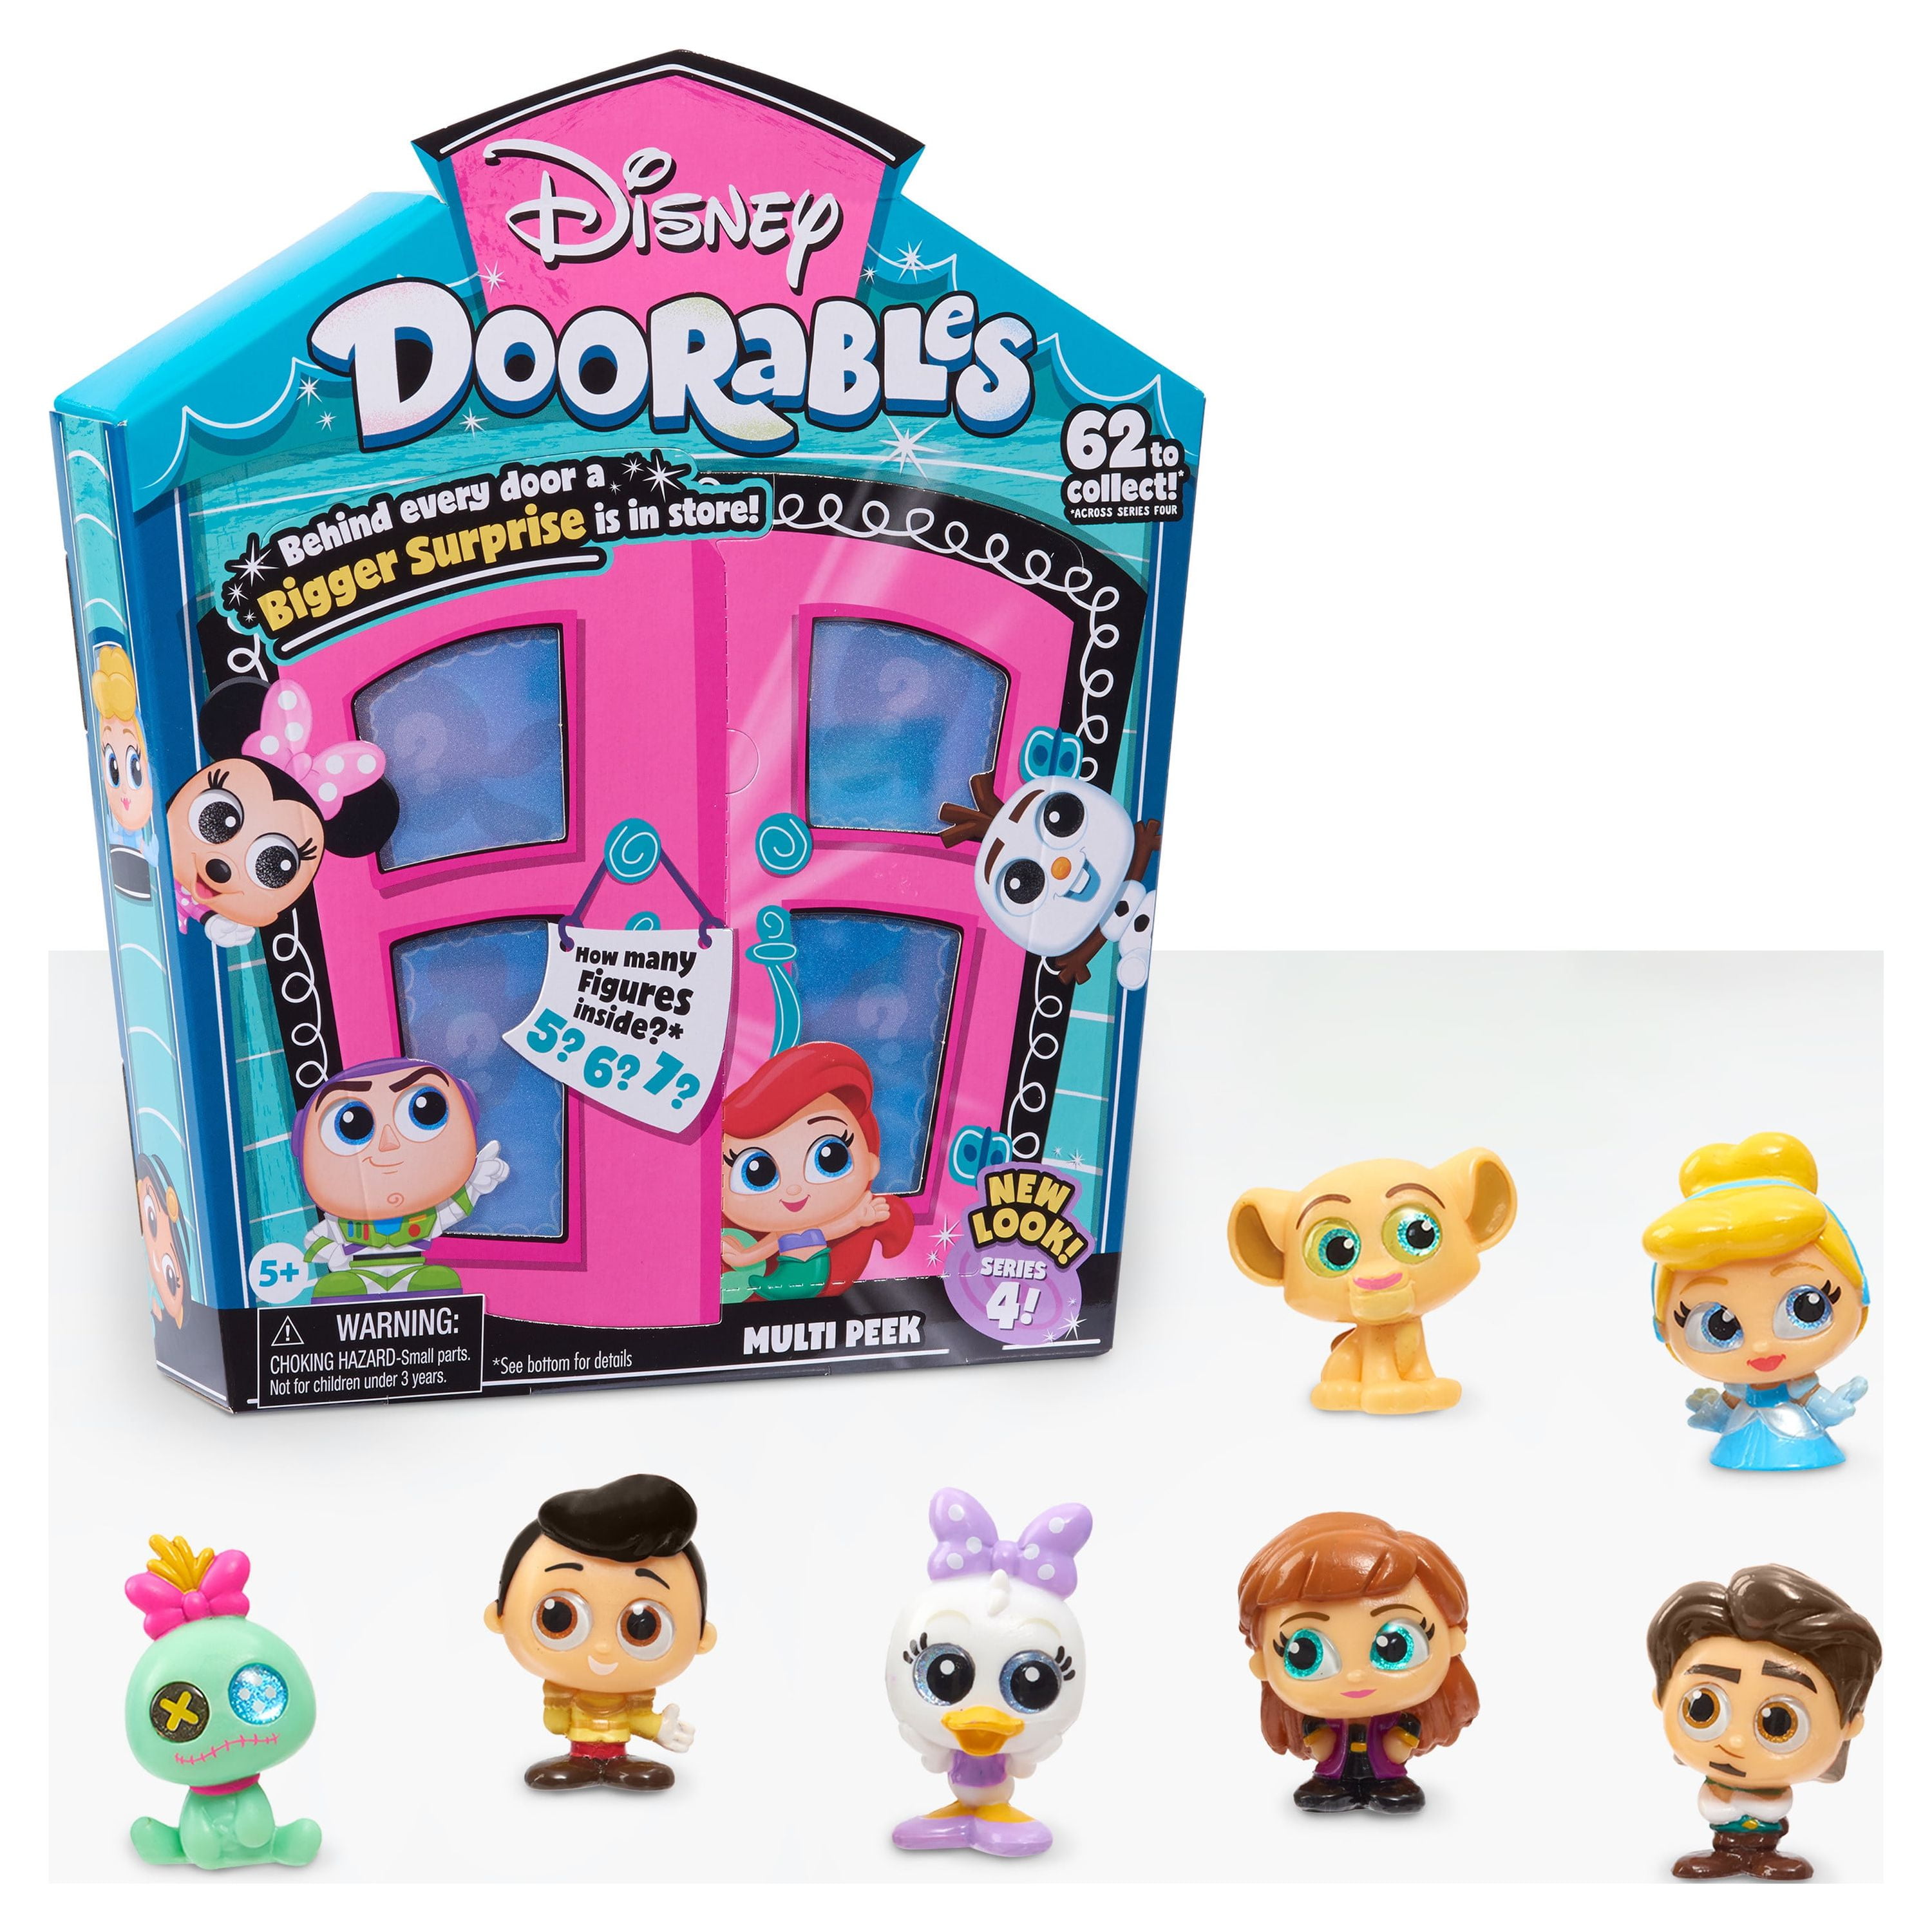  Disney Doorables Stitch Collection Peek, Officially Licensed  Kids Toys for Ages 5 Up by Just Play : Toys & Games